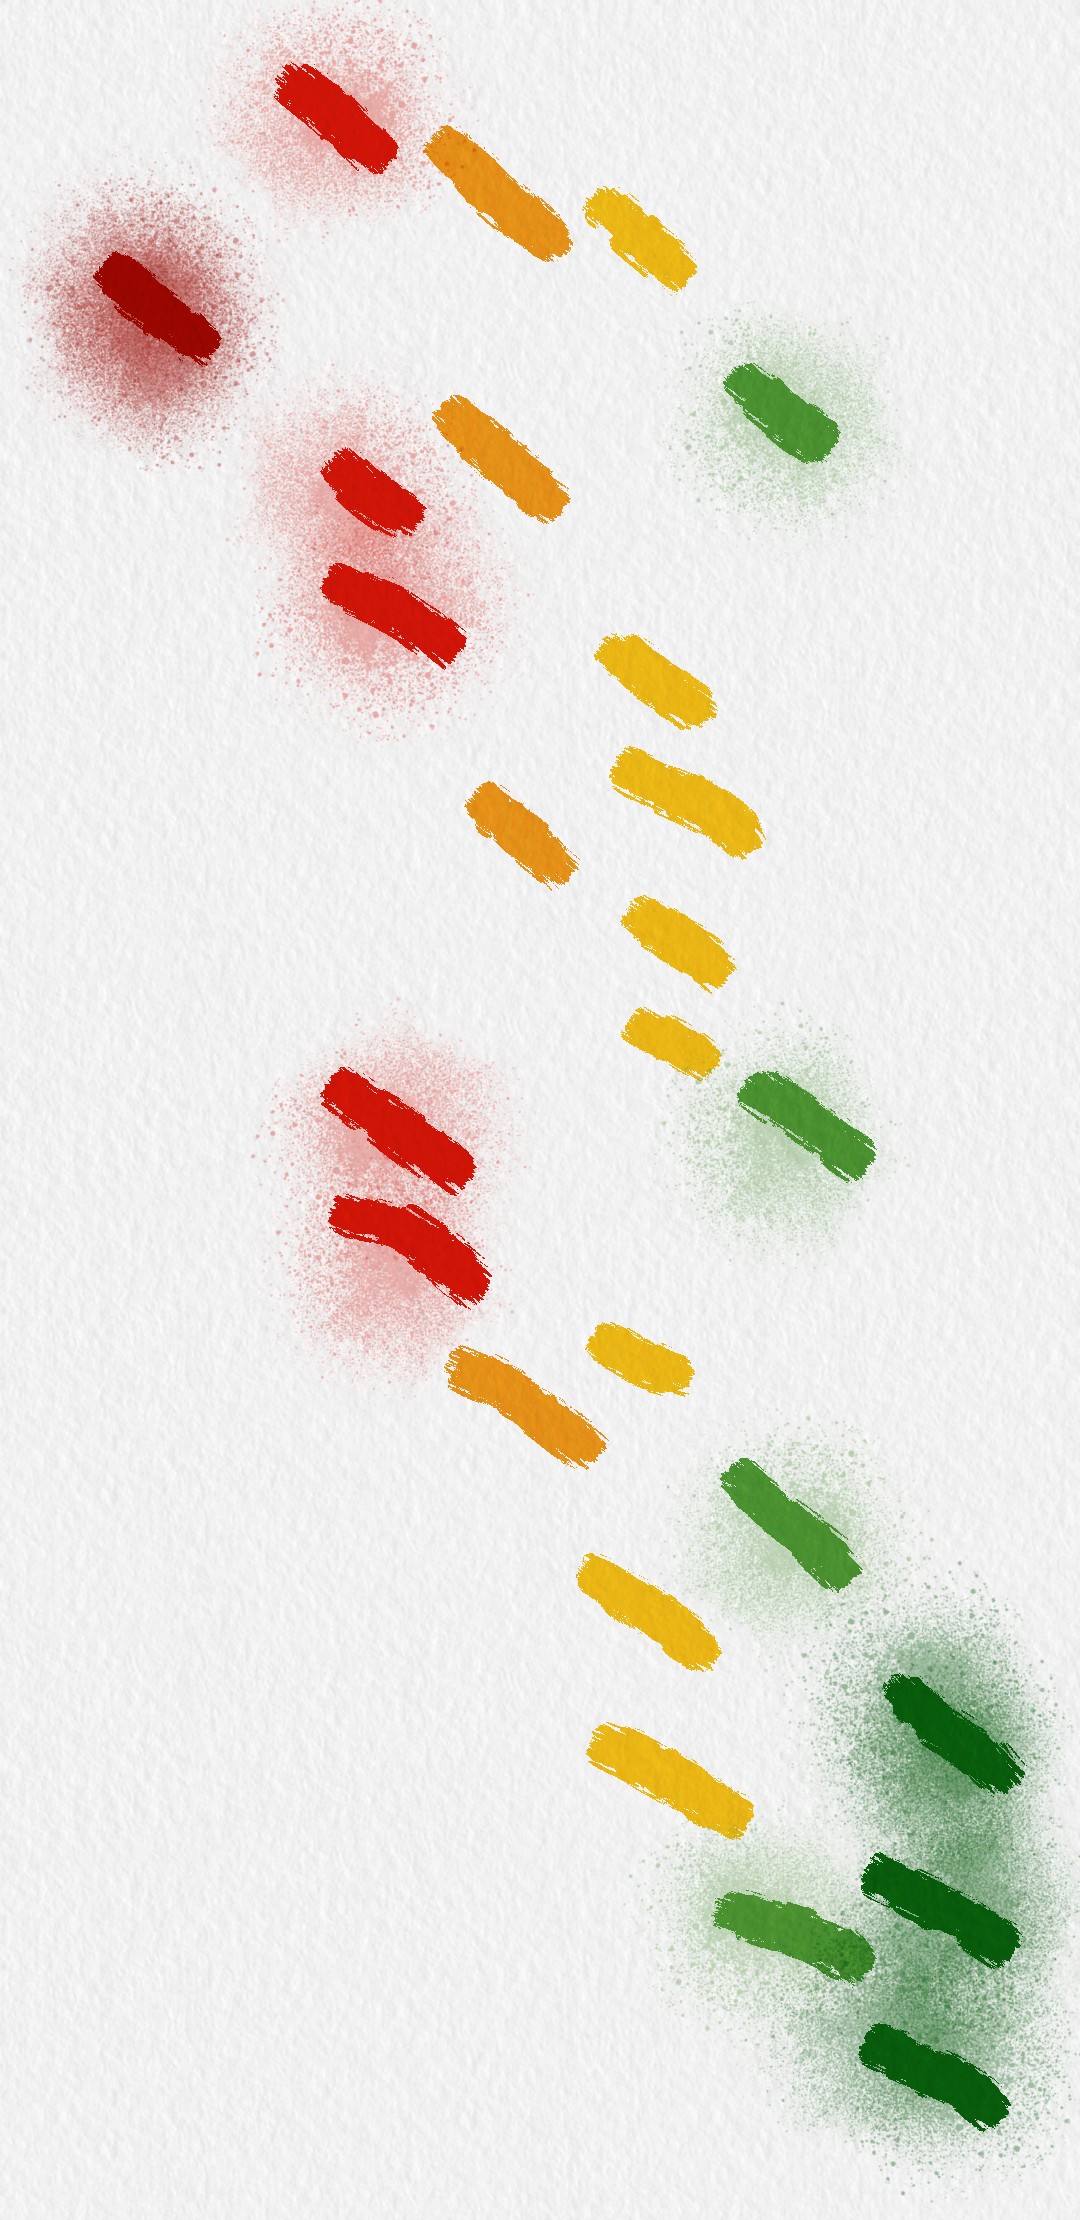 An art piece which comprises of 6 different colours of dashes on a white background. It shows a trend from red to orange to green